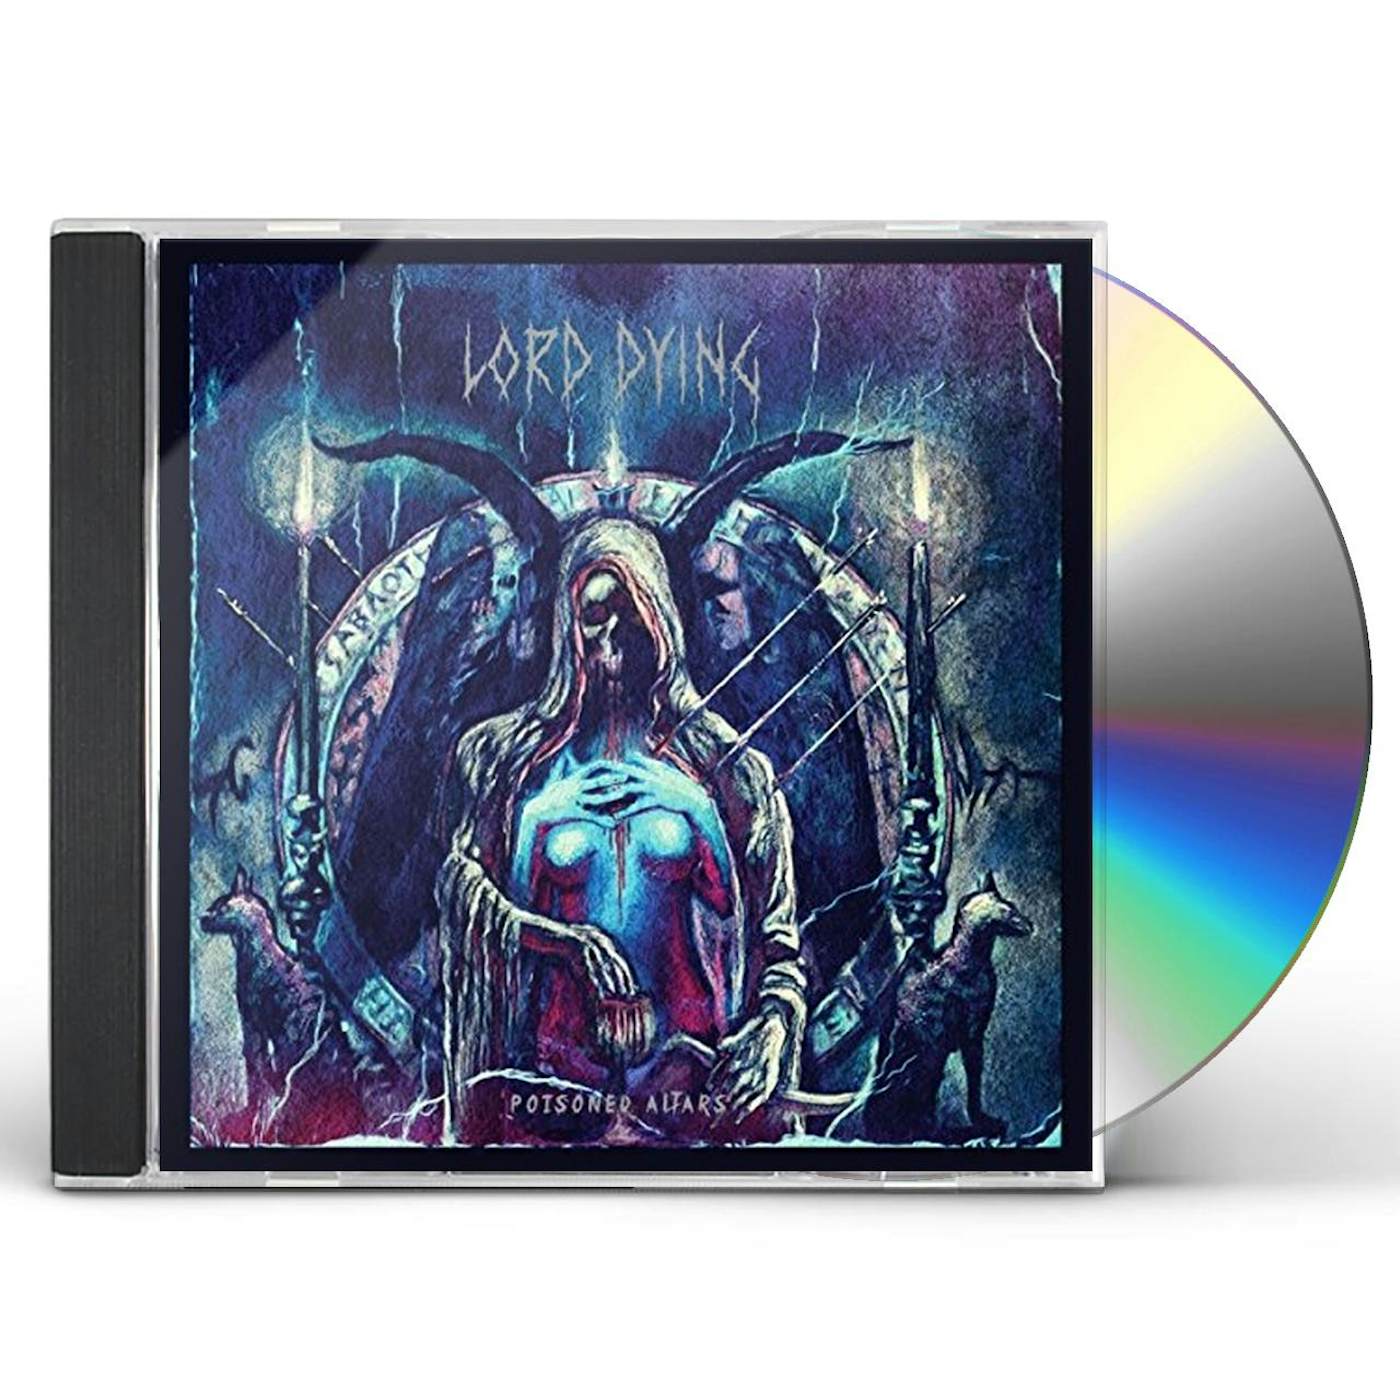 Lord Dying POISONED ALTARS CD